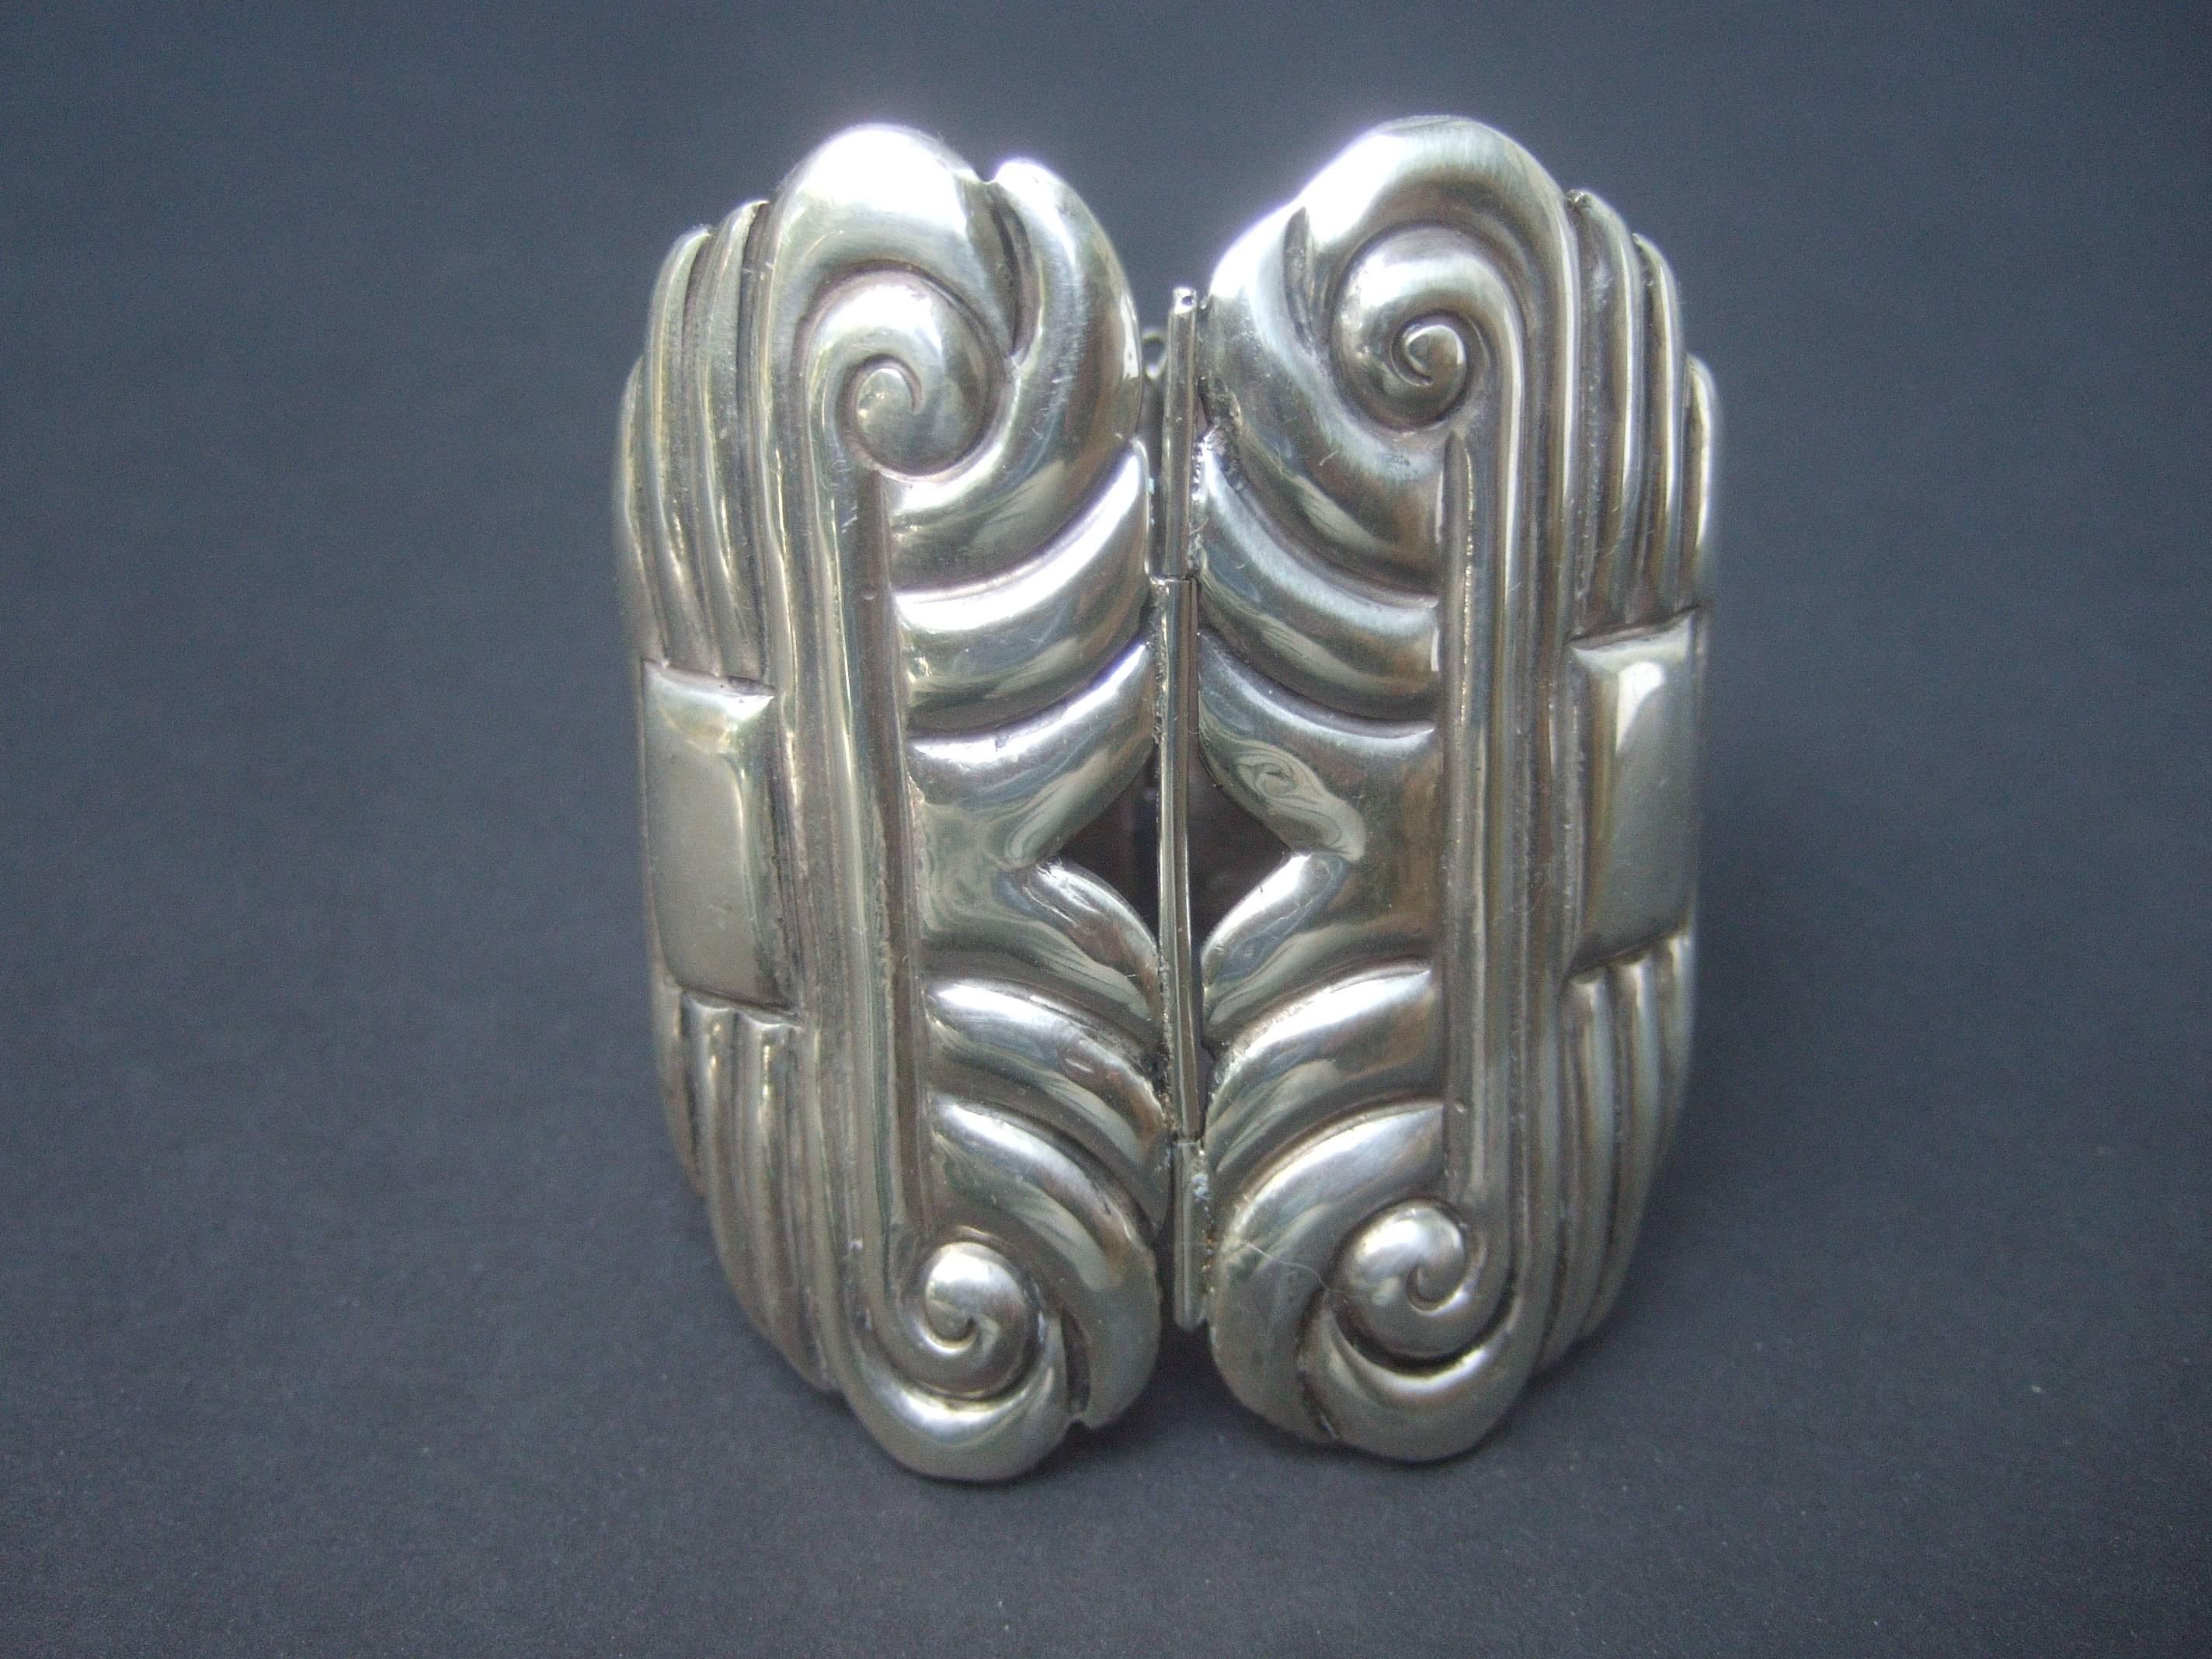 Mexican artisan sterling massive hinged cuff bracelet c 1940s
The huge scale handmade bracelet is designed with 
vertical and horizontal impressed lines accented 
with scrolled detail.The severe design has an art deco
style influence  

The